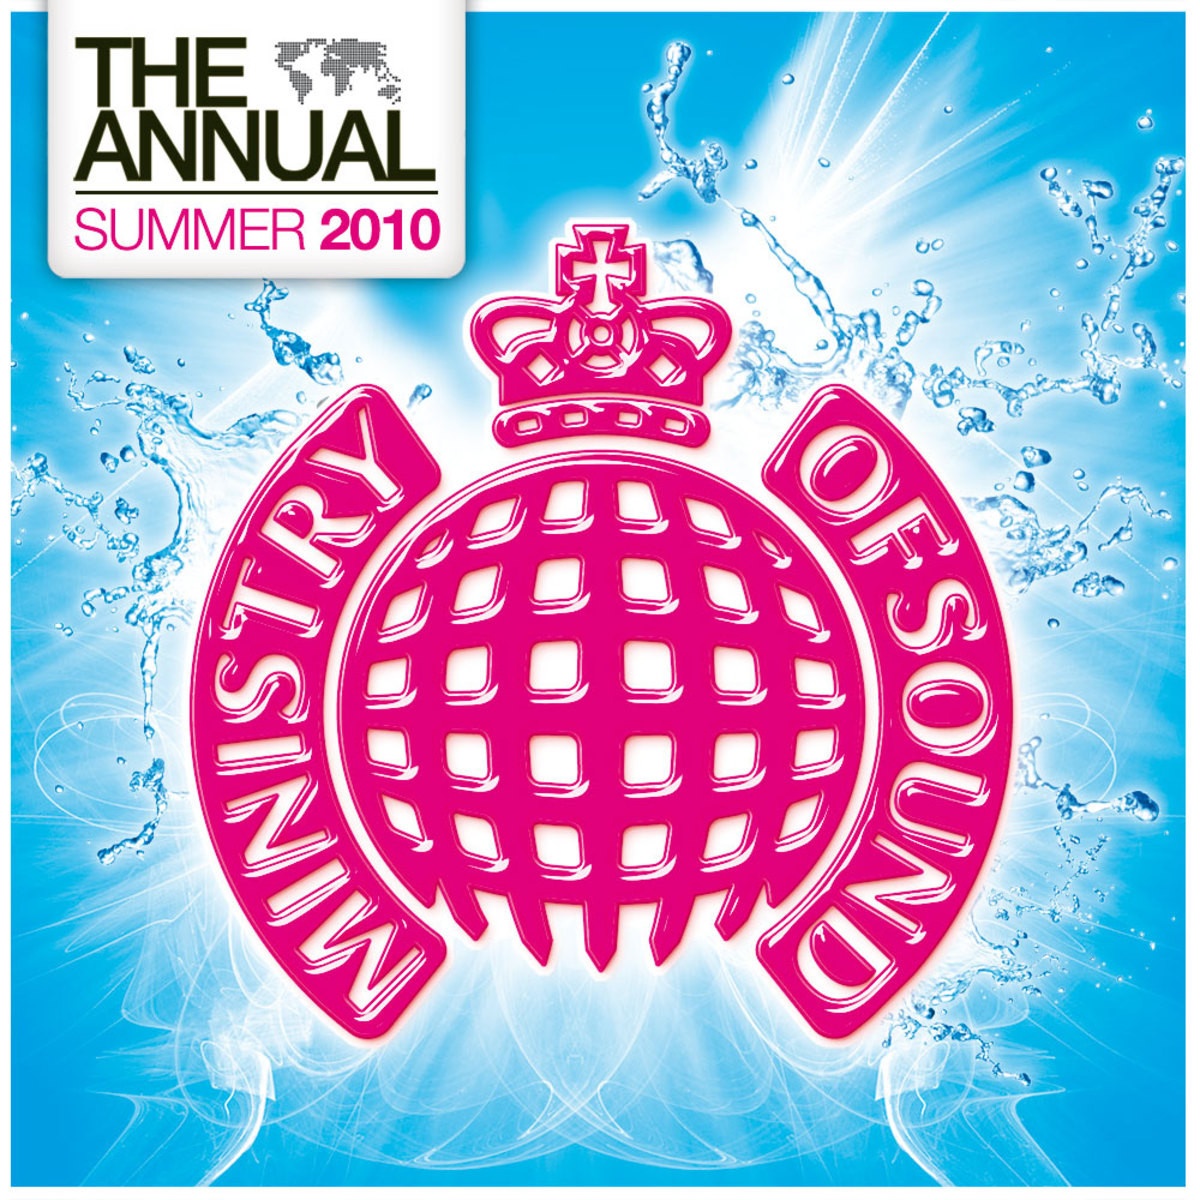 Ministry of Sound - The Annual Summer 2010